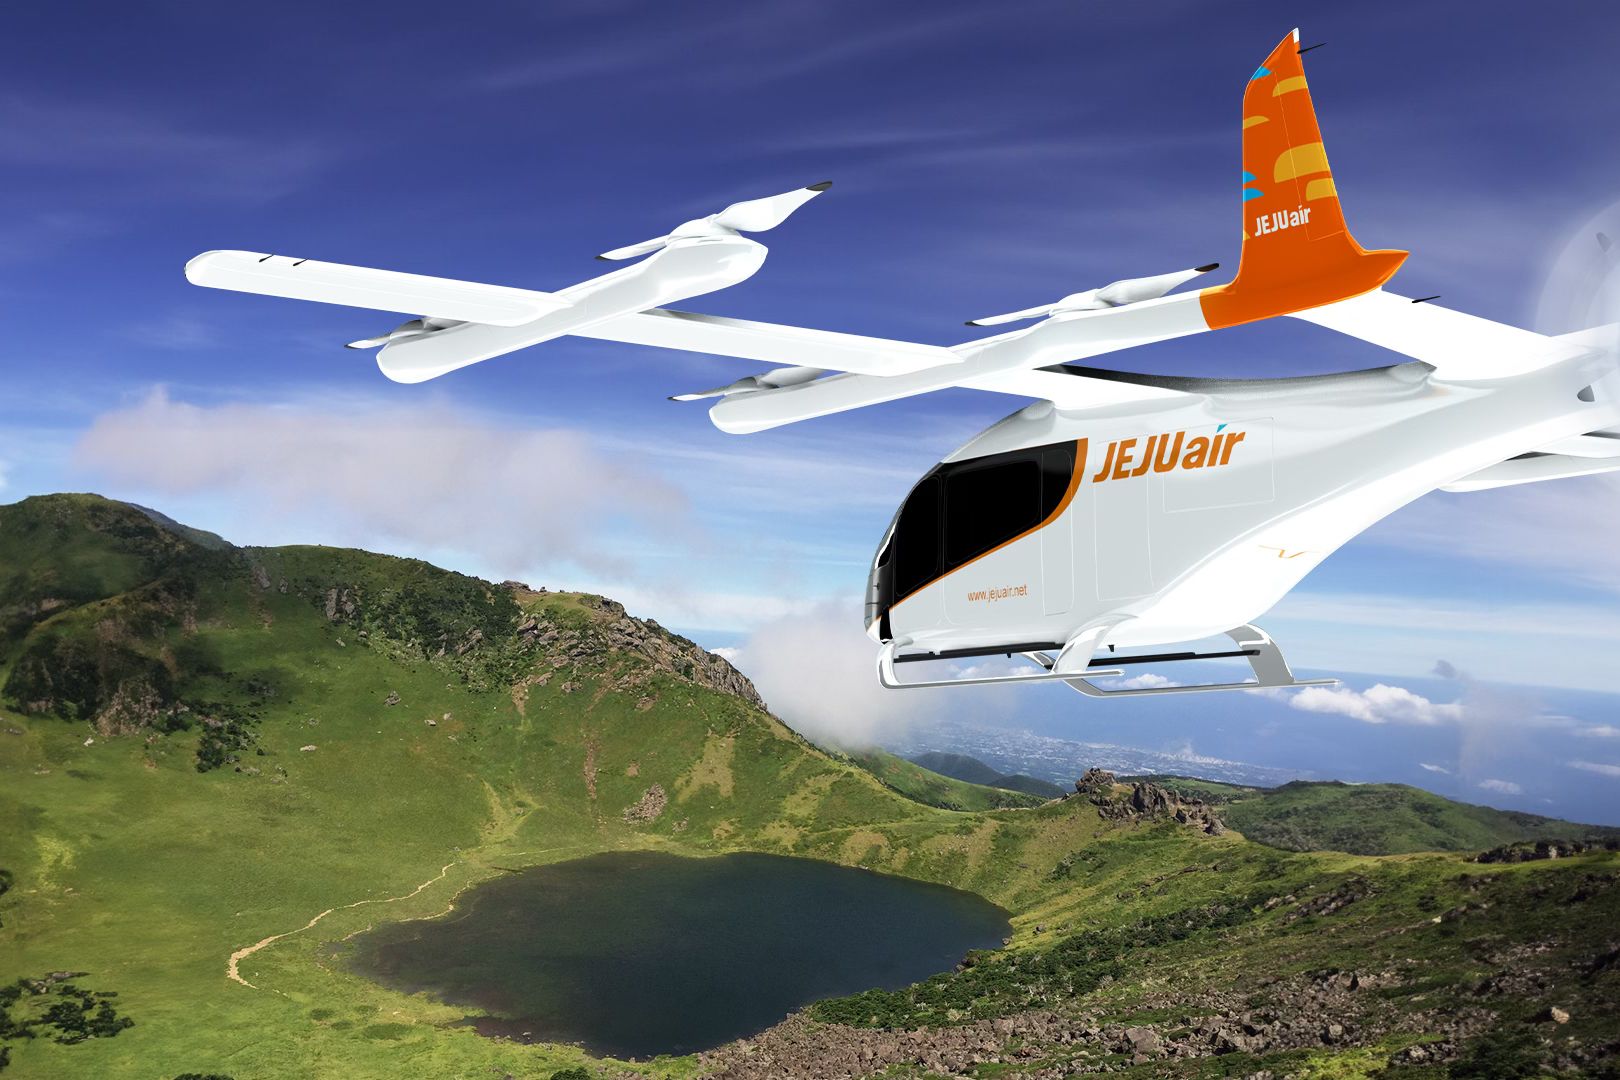 Eve Mobility eVTOL Aircraft with Jeju Air livery